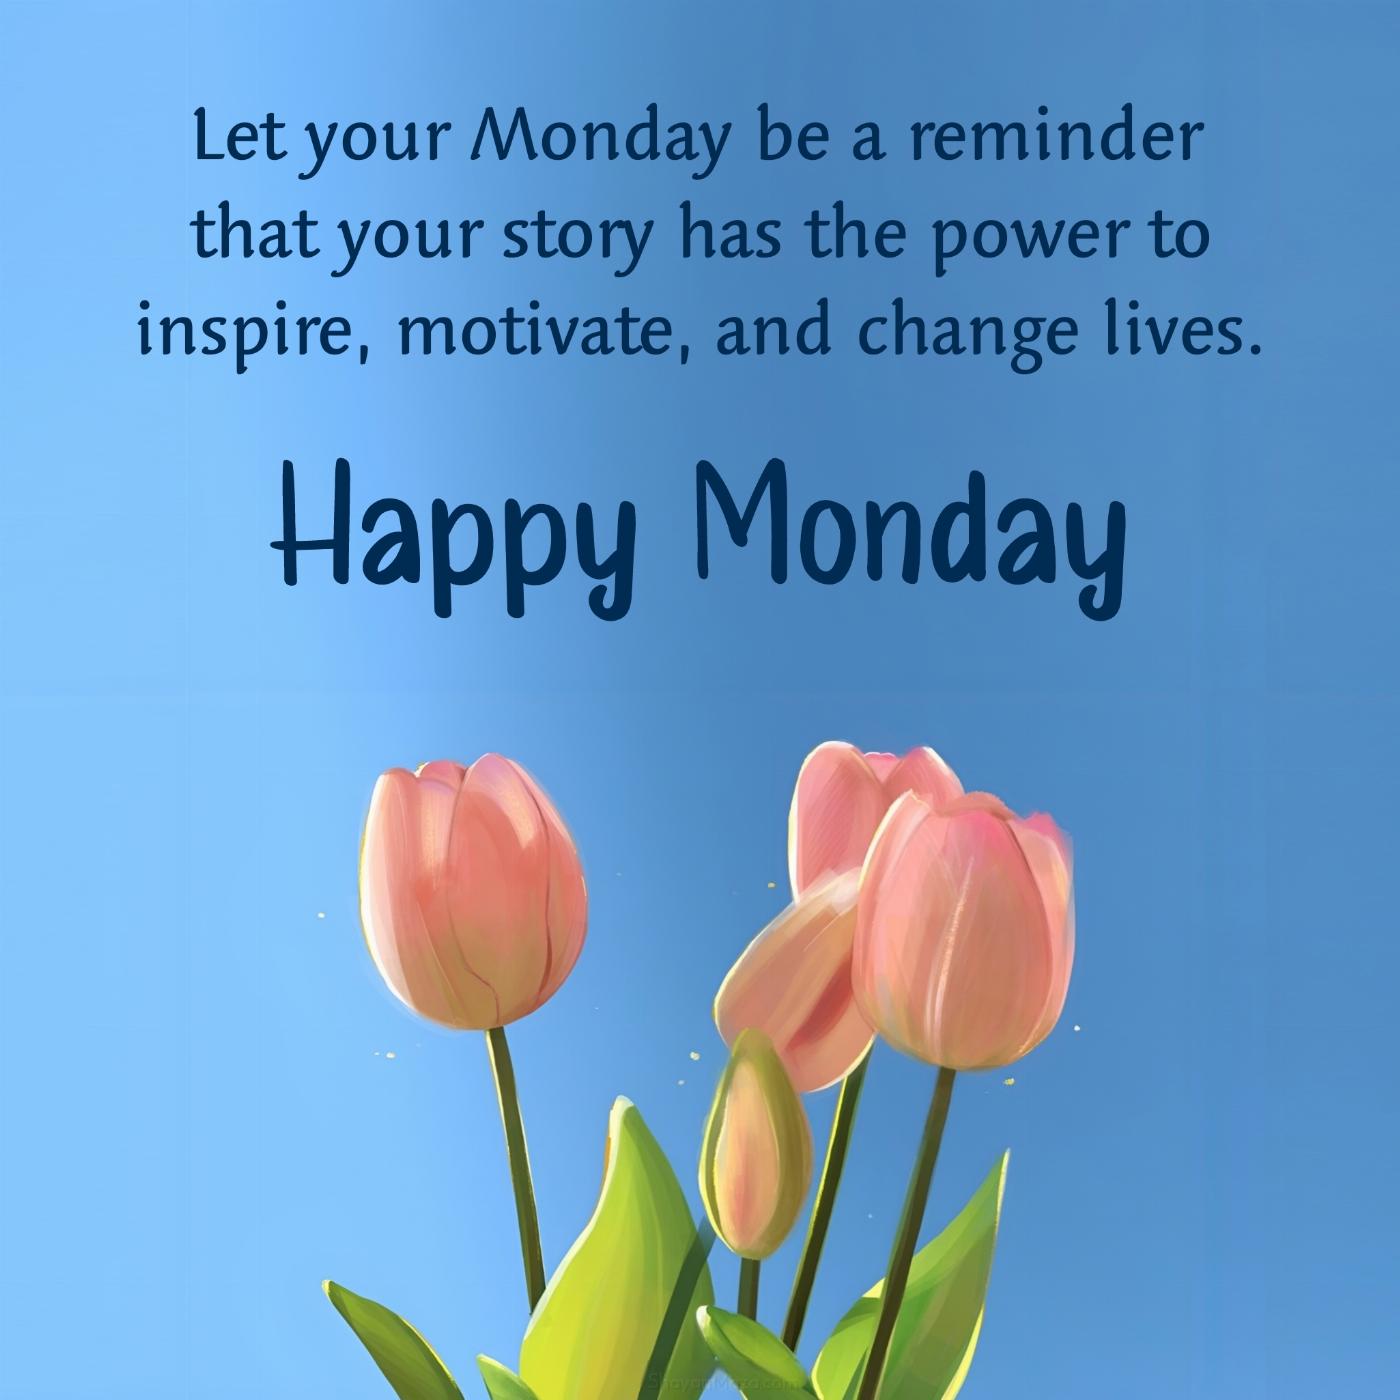 Let your Monday be a reminder that your story has the power to inspire